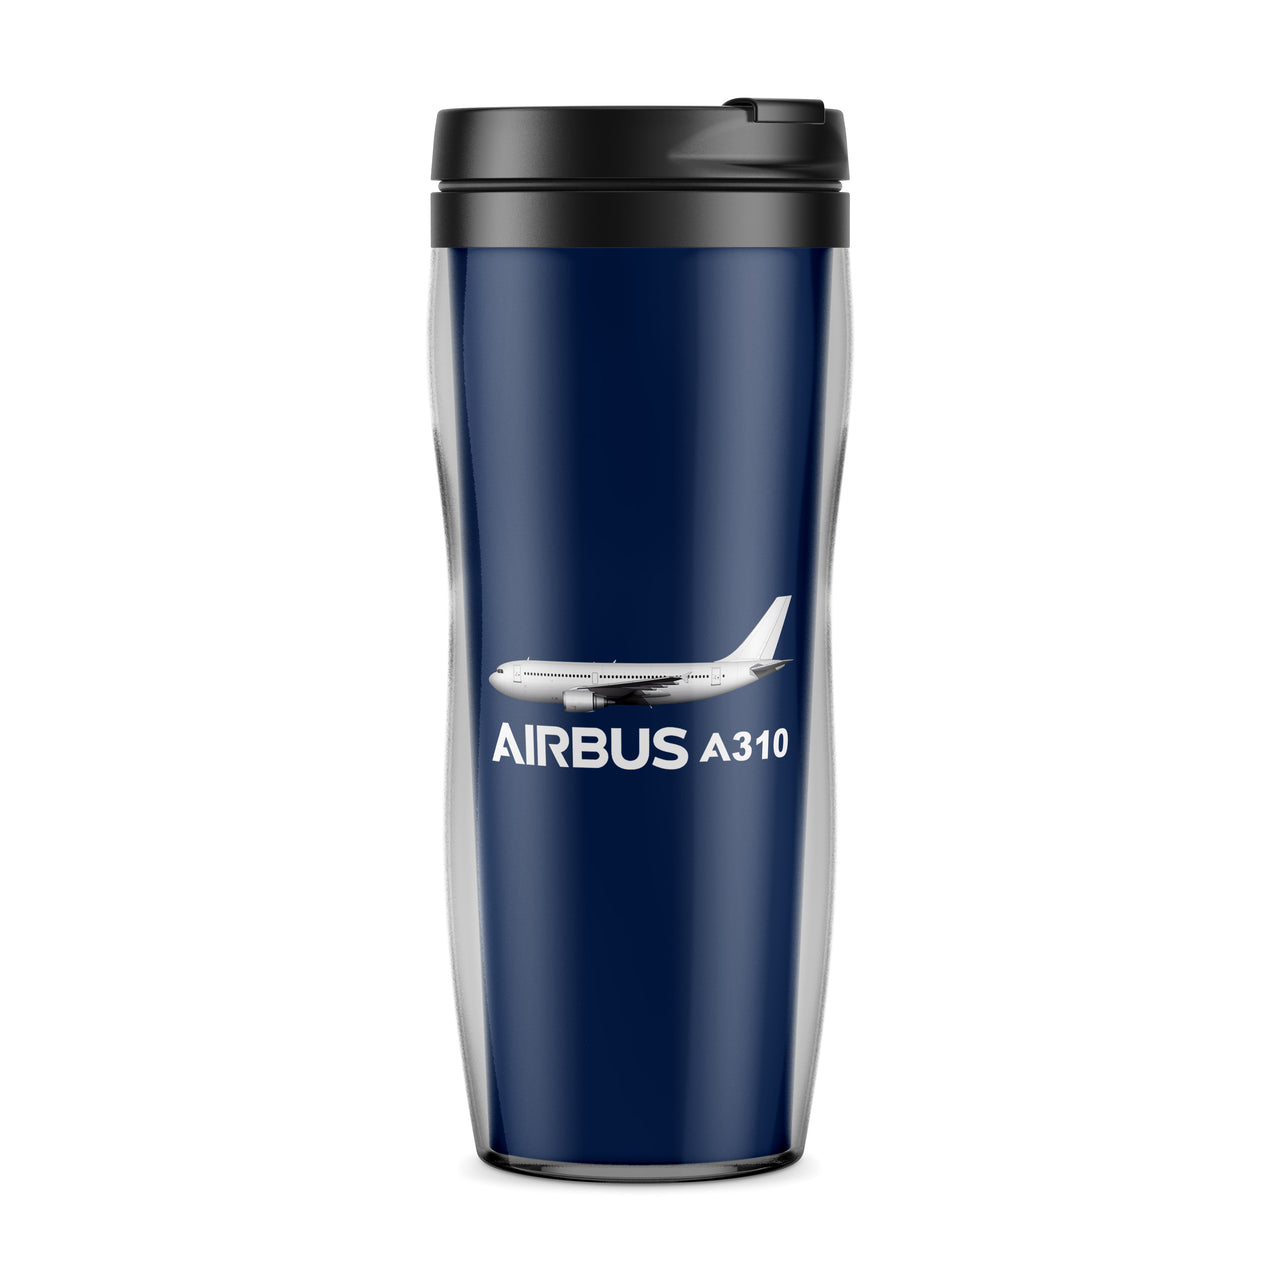 The Airbus A310 Designed Travel Mugs